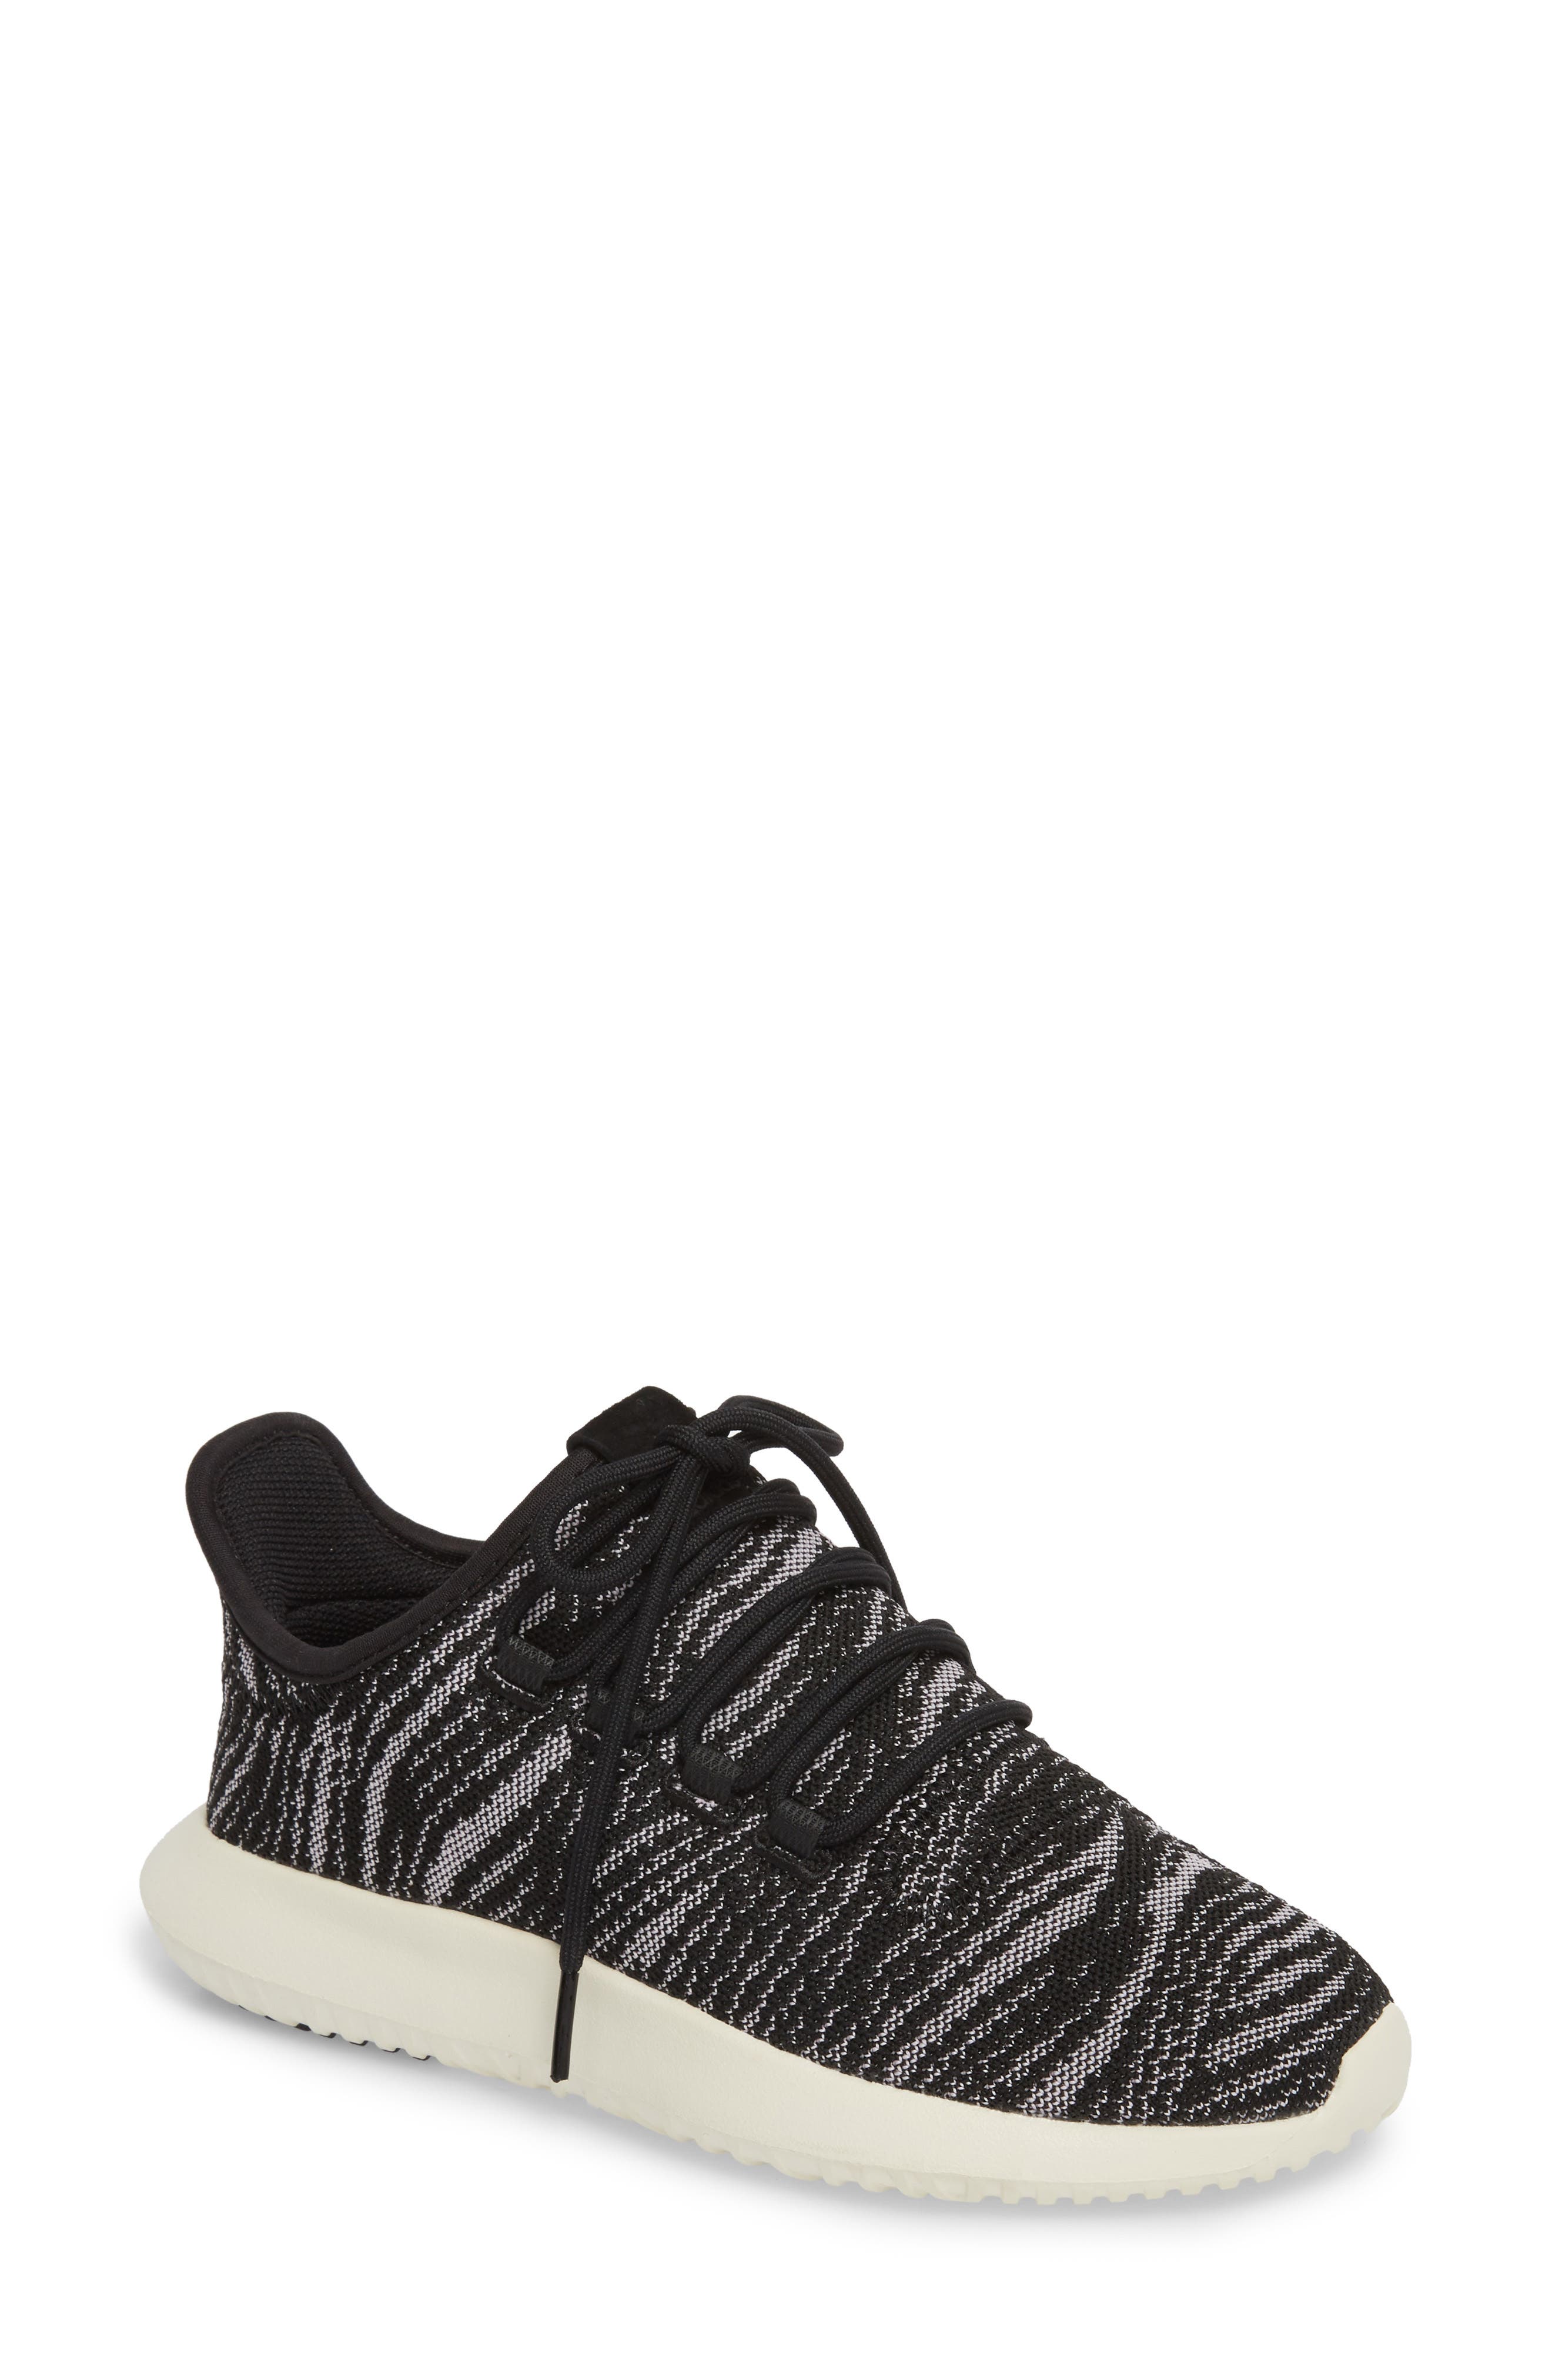 adidas women's shoes nordstrom rack